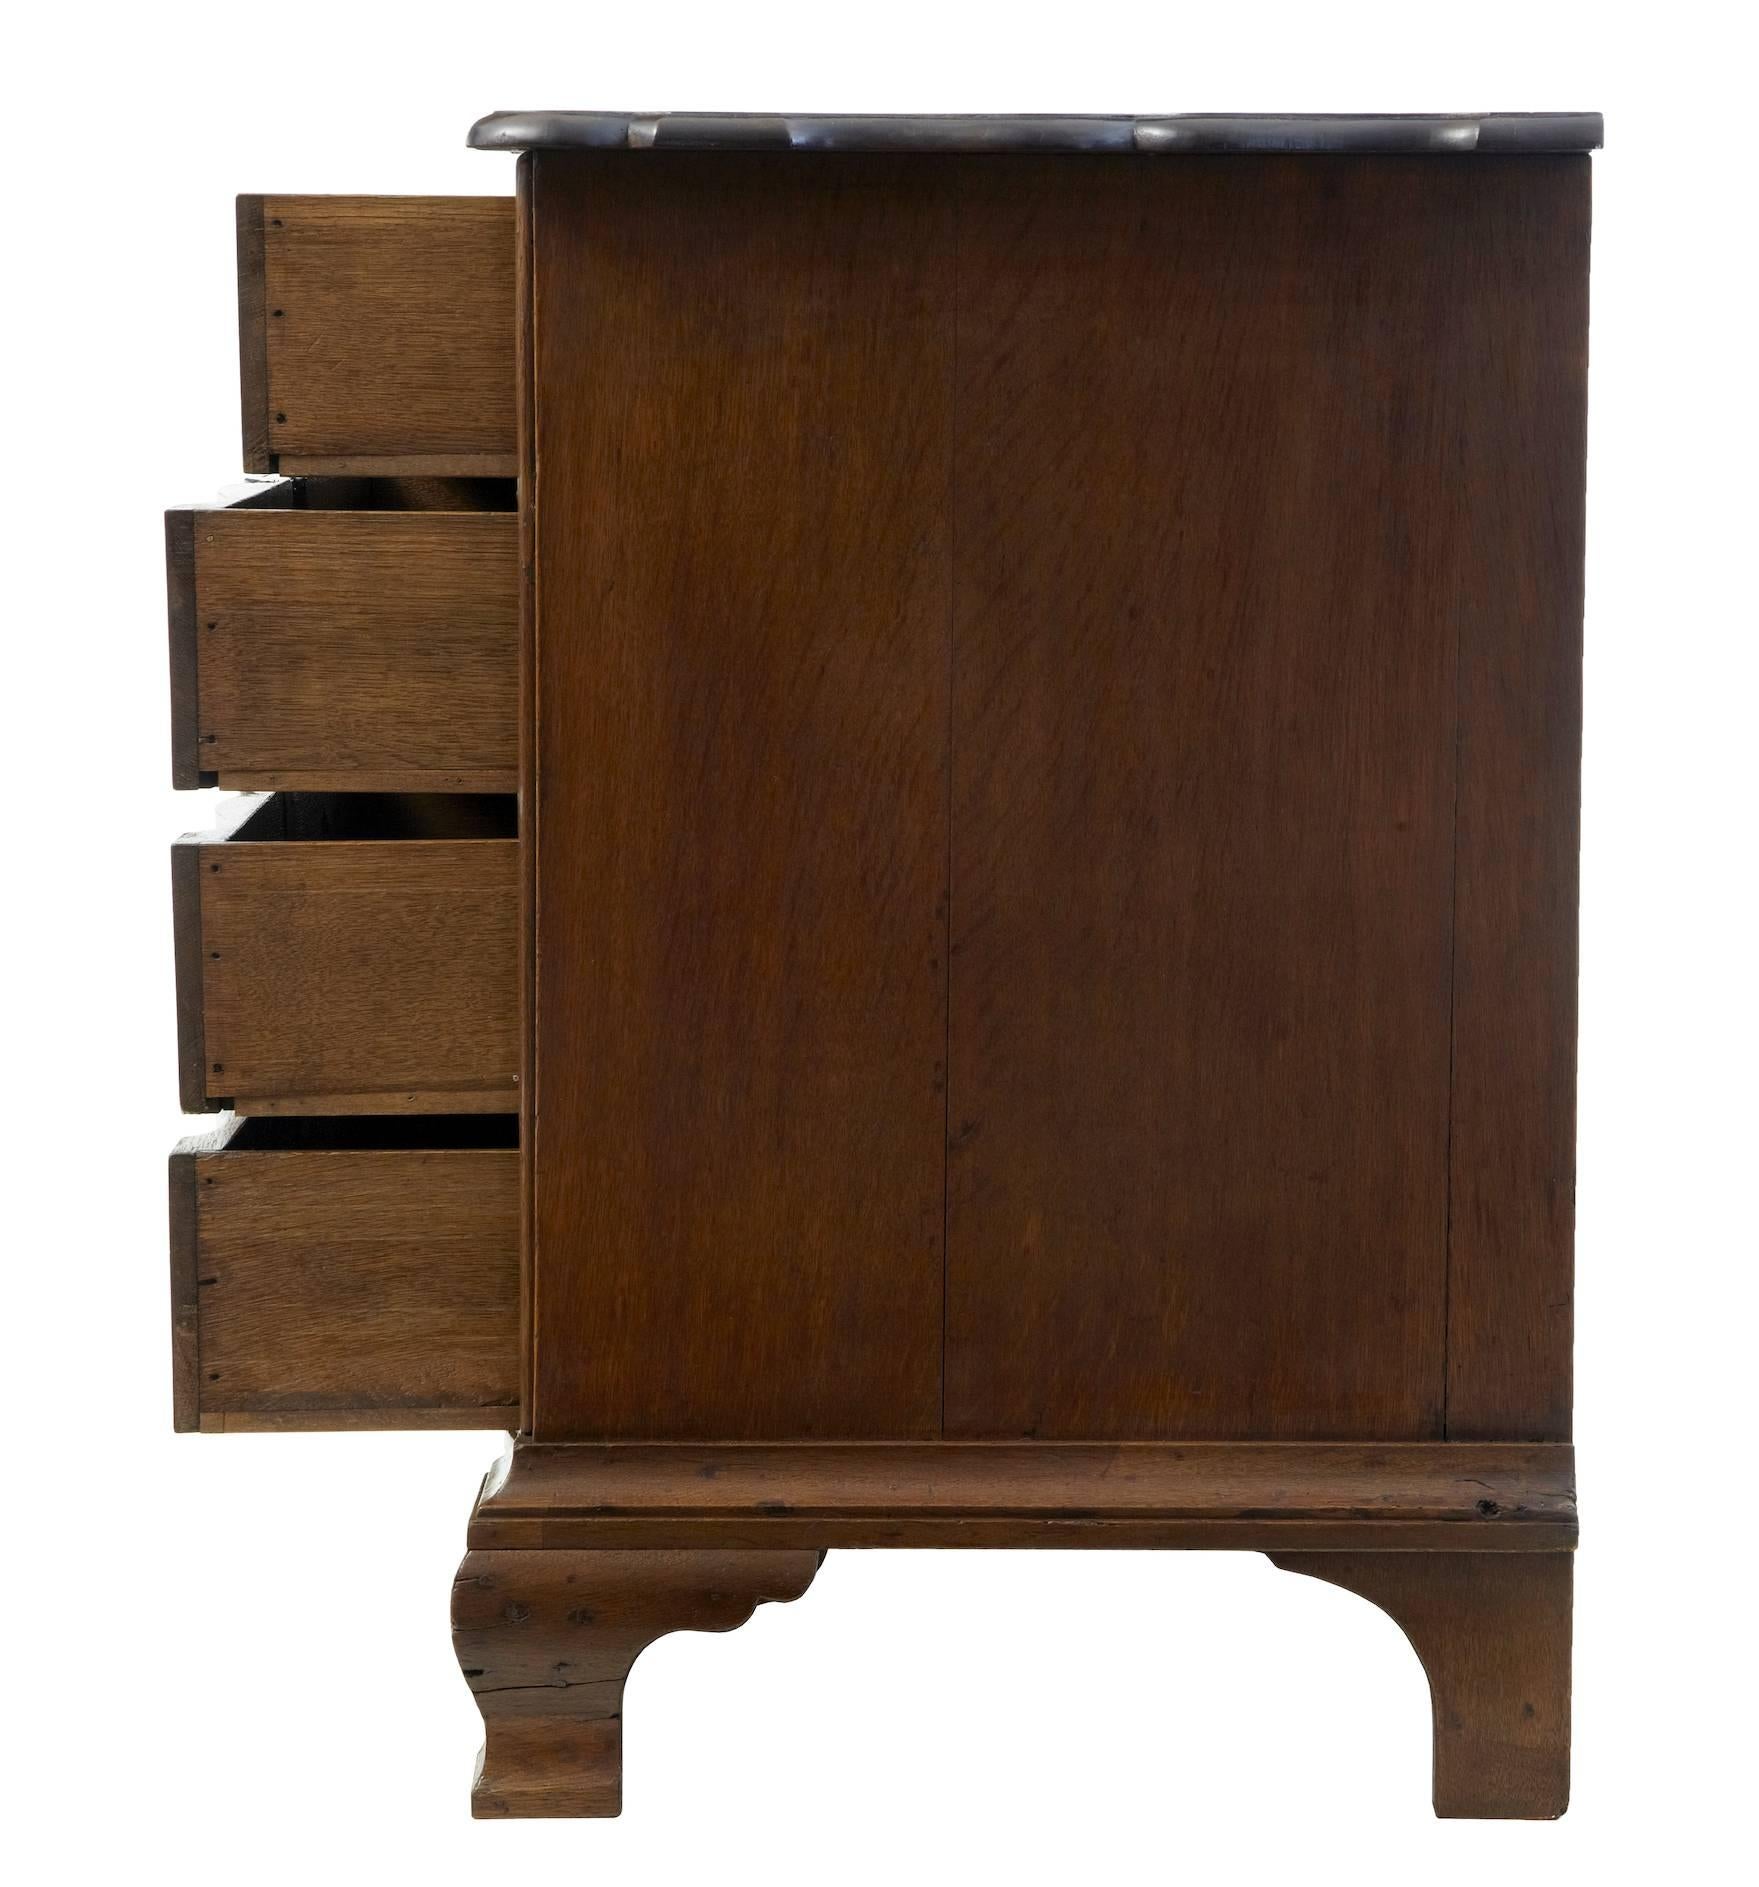 Block fronted commode, circa 1890.
Four-drawer chest with original handles.
Shaped drawer fronts and top.
Standing on ogee bracket feet

Height: 32